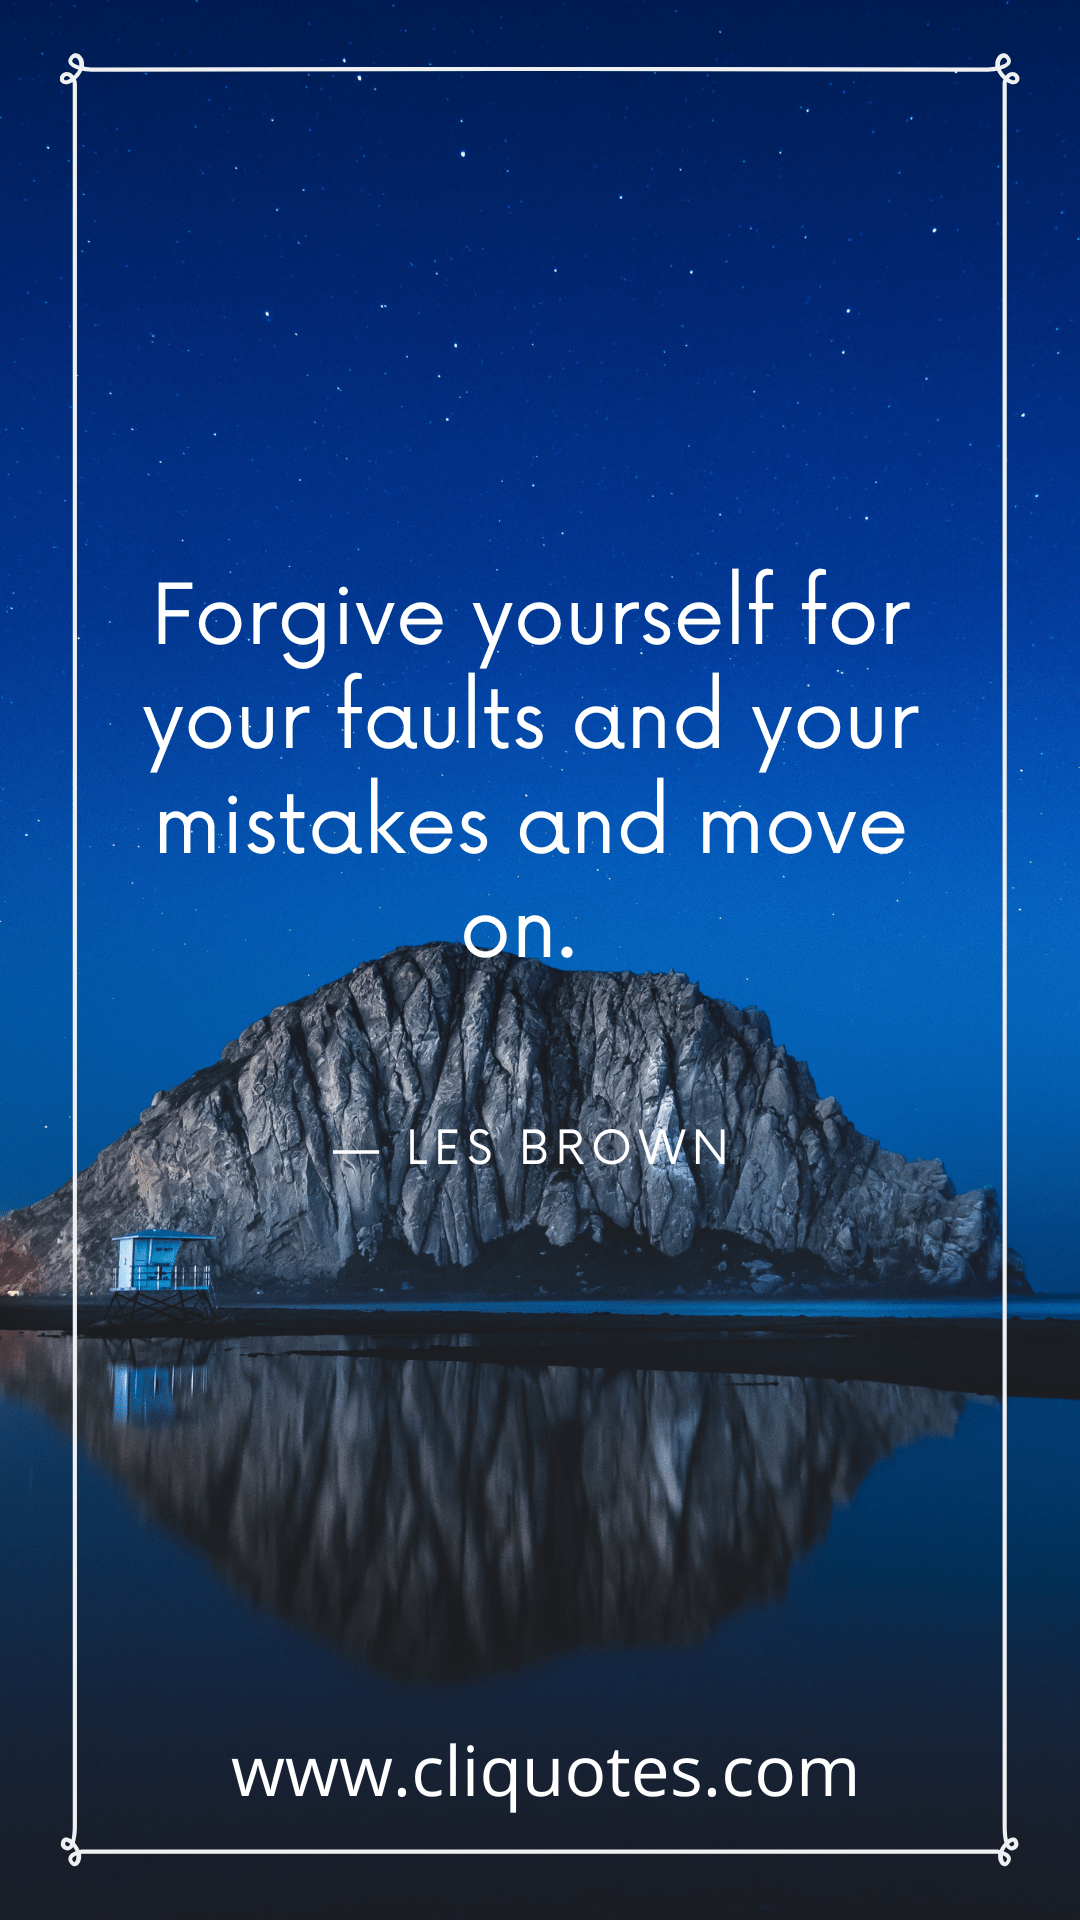 Forgive yourself for your faults and your mistakes and move on. — LES BROWN